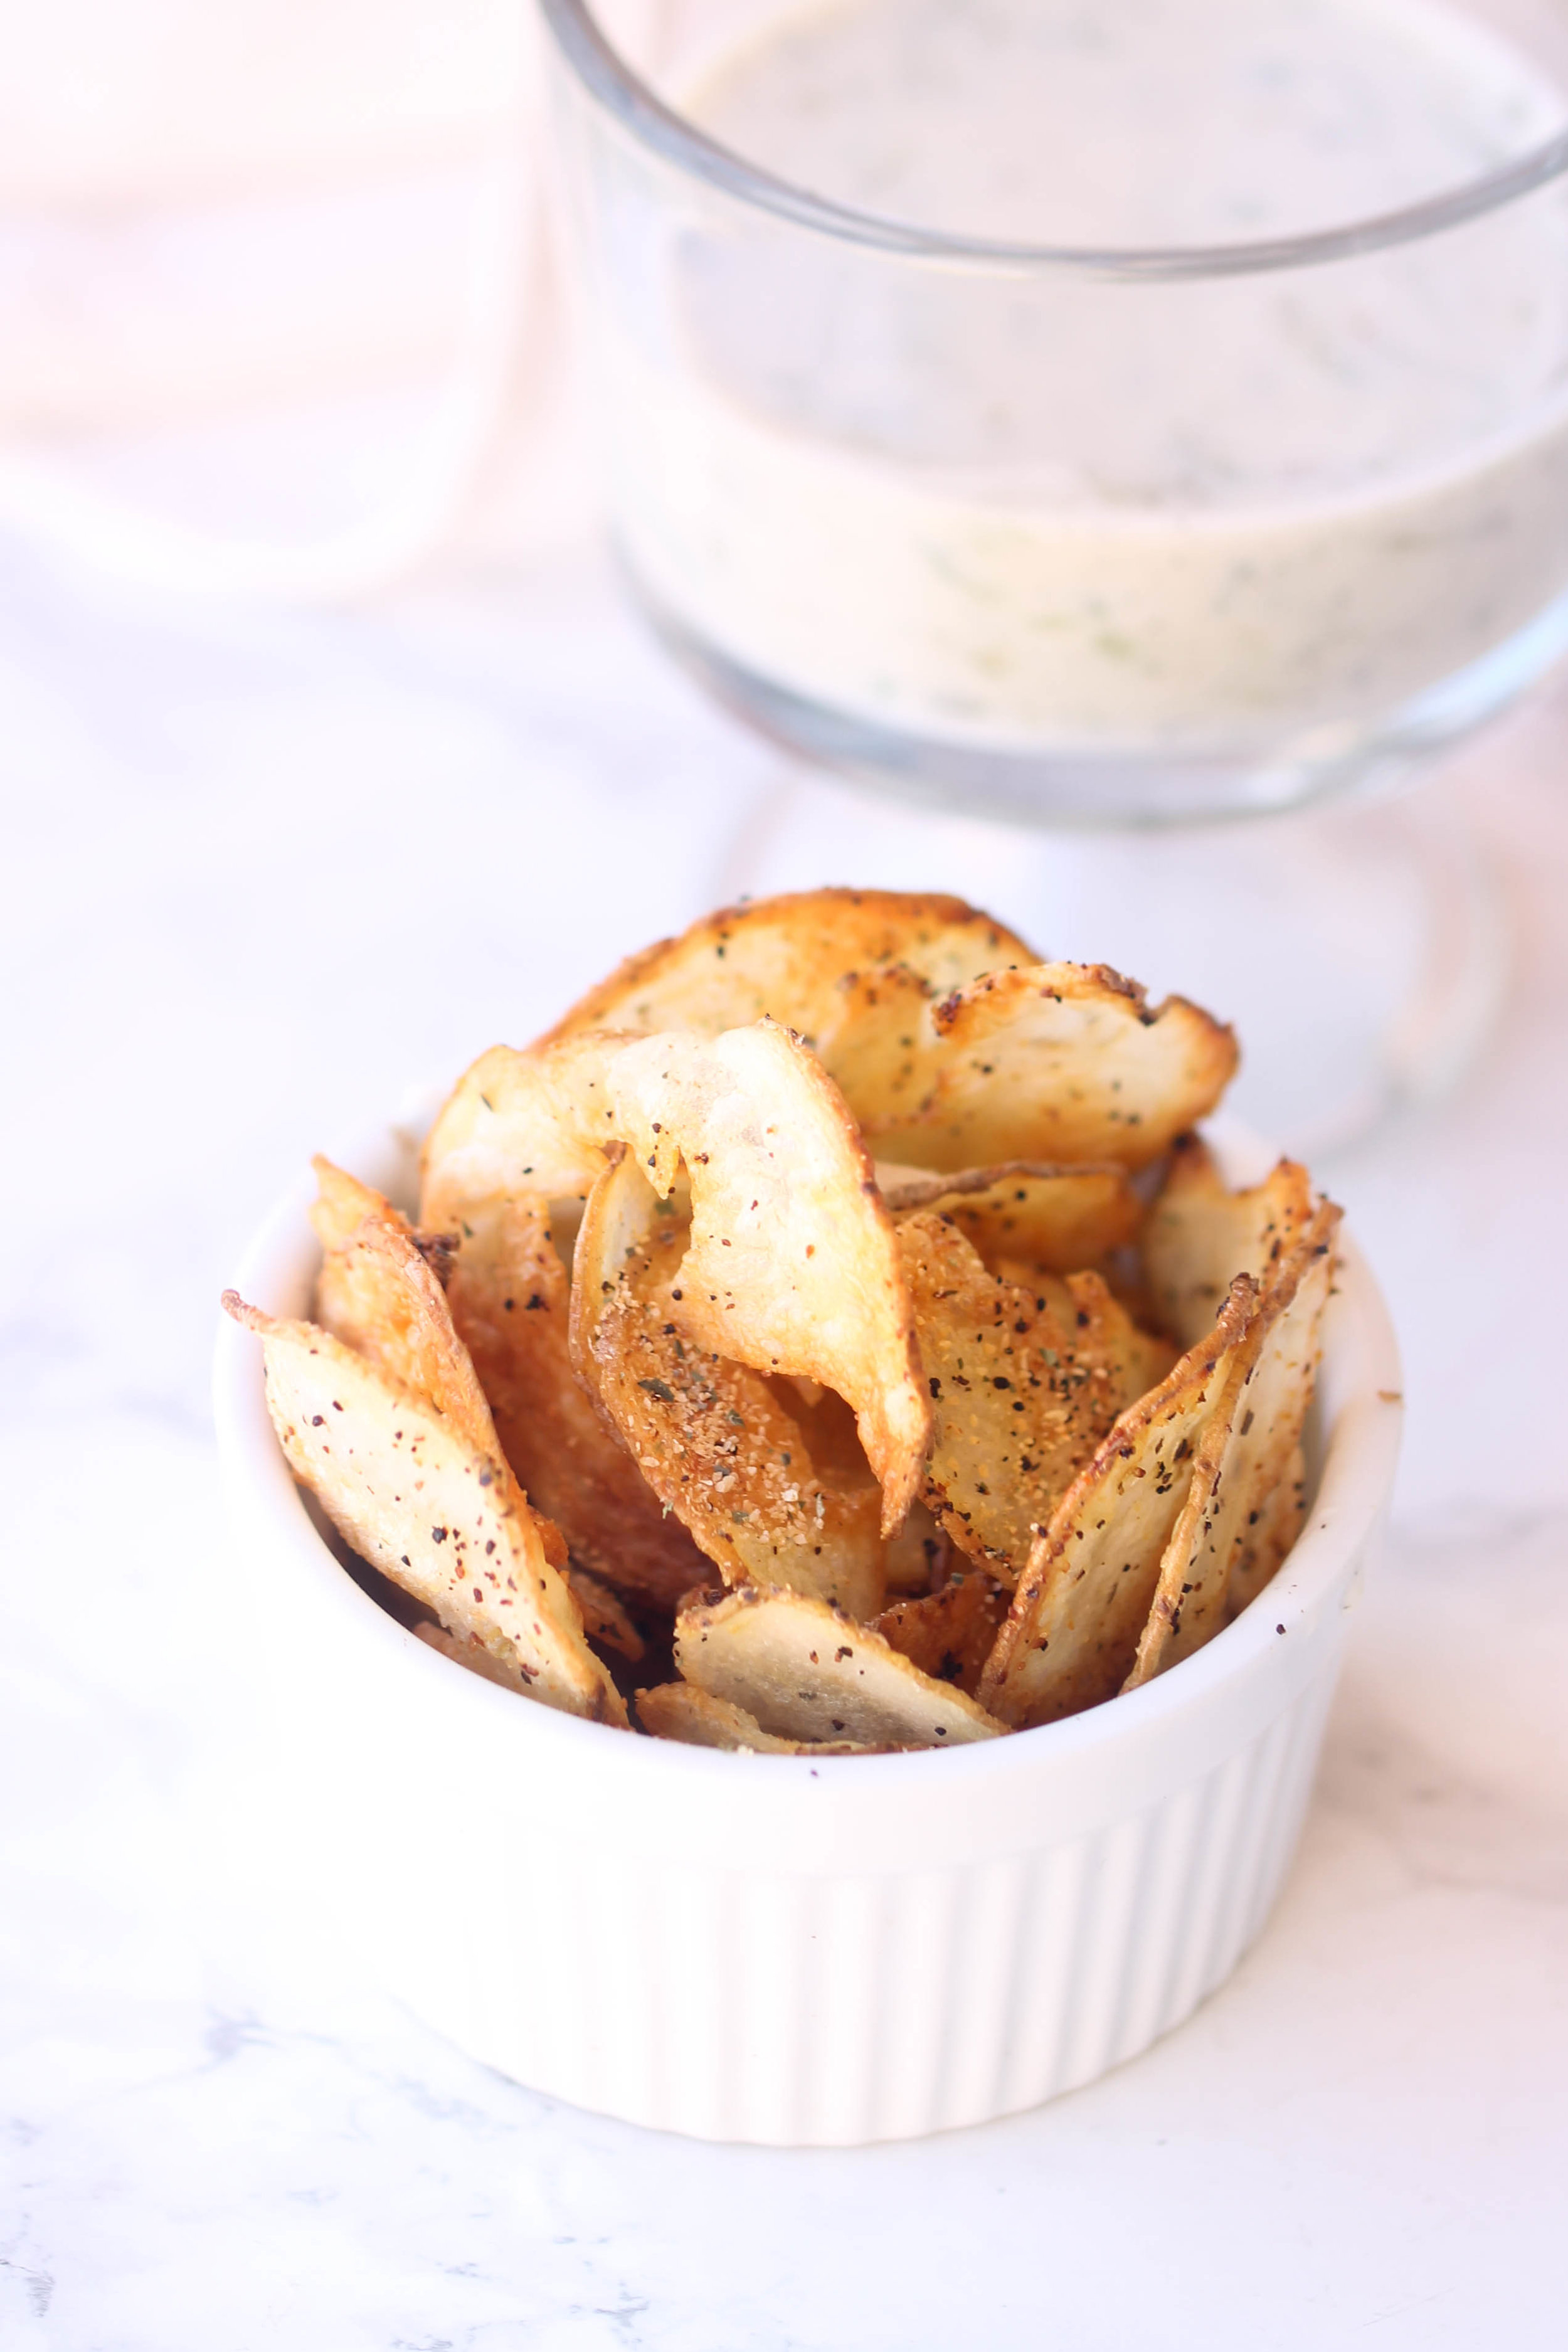 Crispy Baked Potato Chips are a healthier alternative to store-bought potato chips. They are super simple to make and you can easily customize herbs and spices.